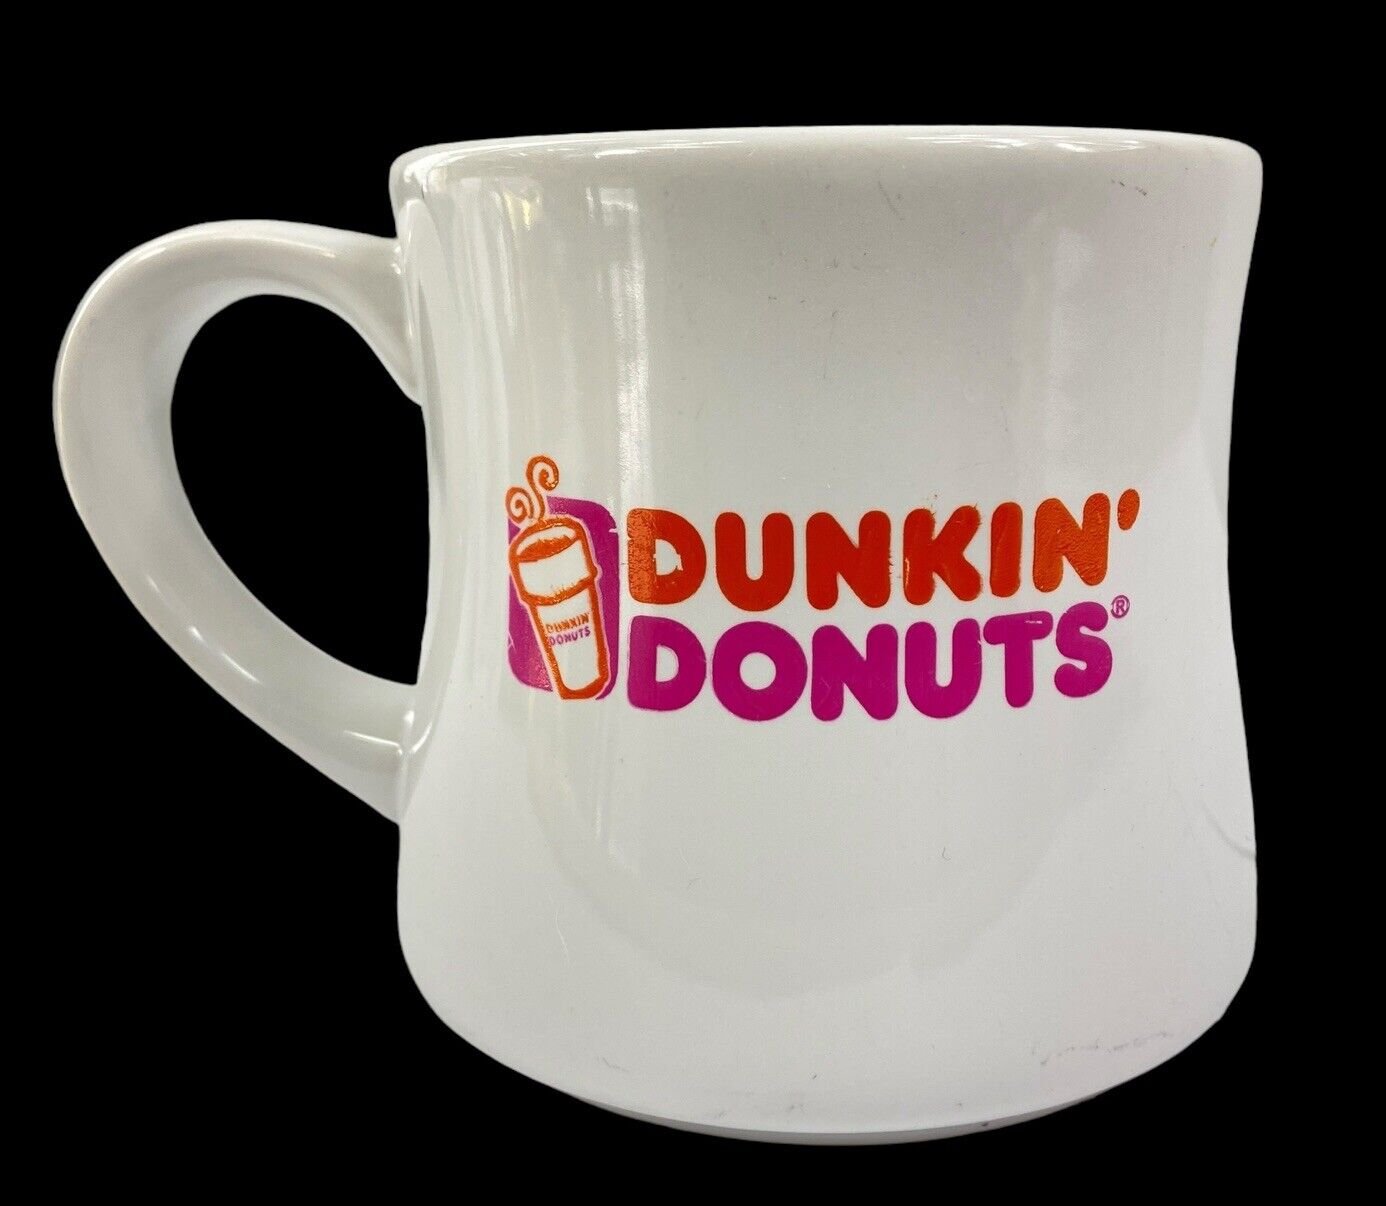 Dunkin Donuts Mug Coffee Cup Diner Style Vintage Old Style Ceramic Heavy 12 oz